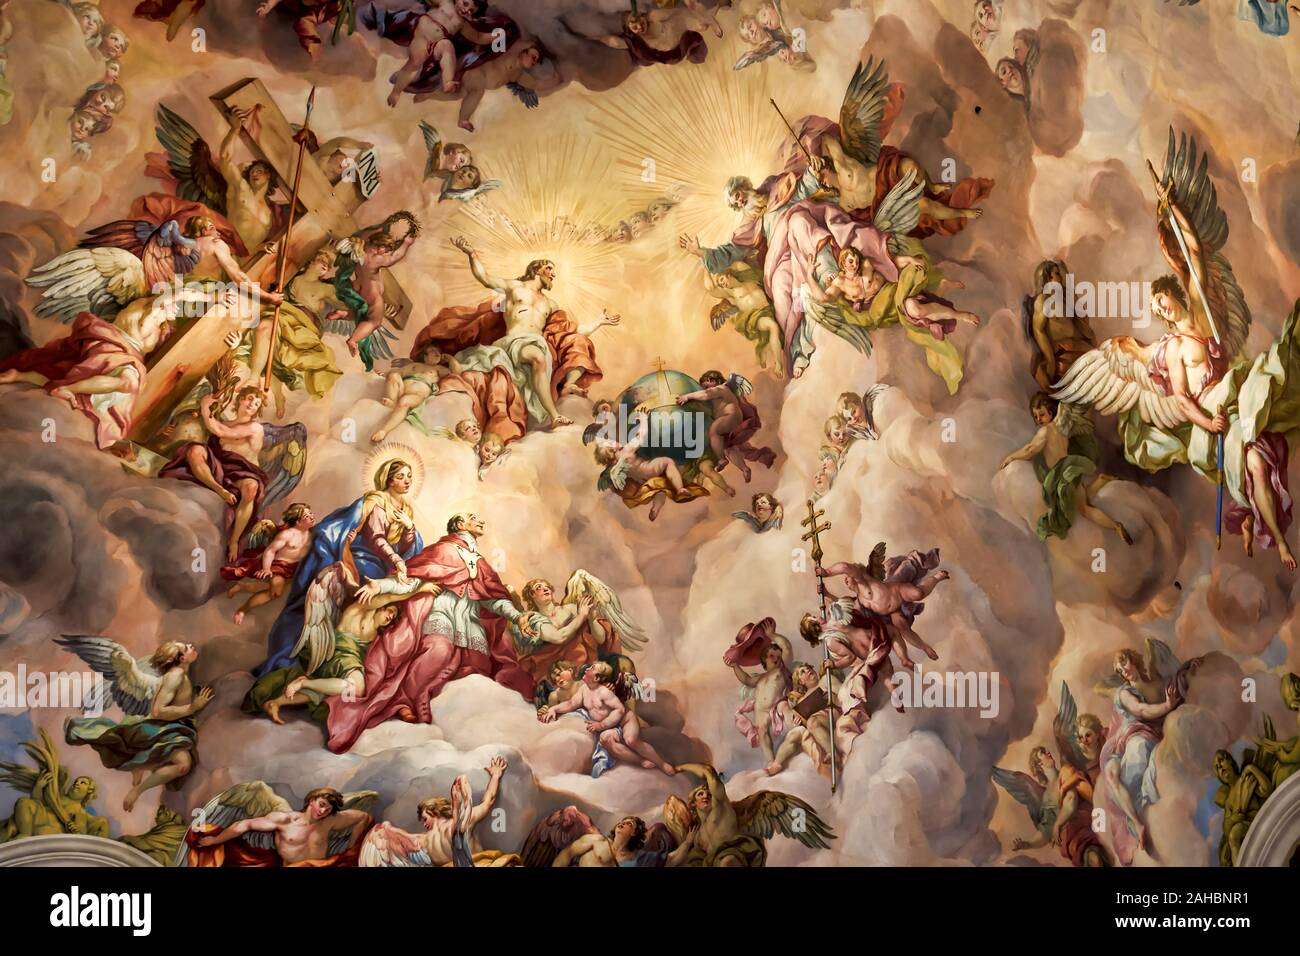 The frescoed ceiling of the Karlskirche St. Charles church. Vienna Austria Stock Photo